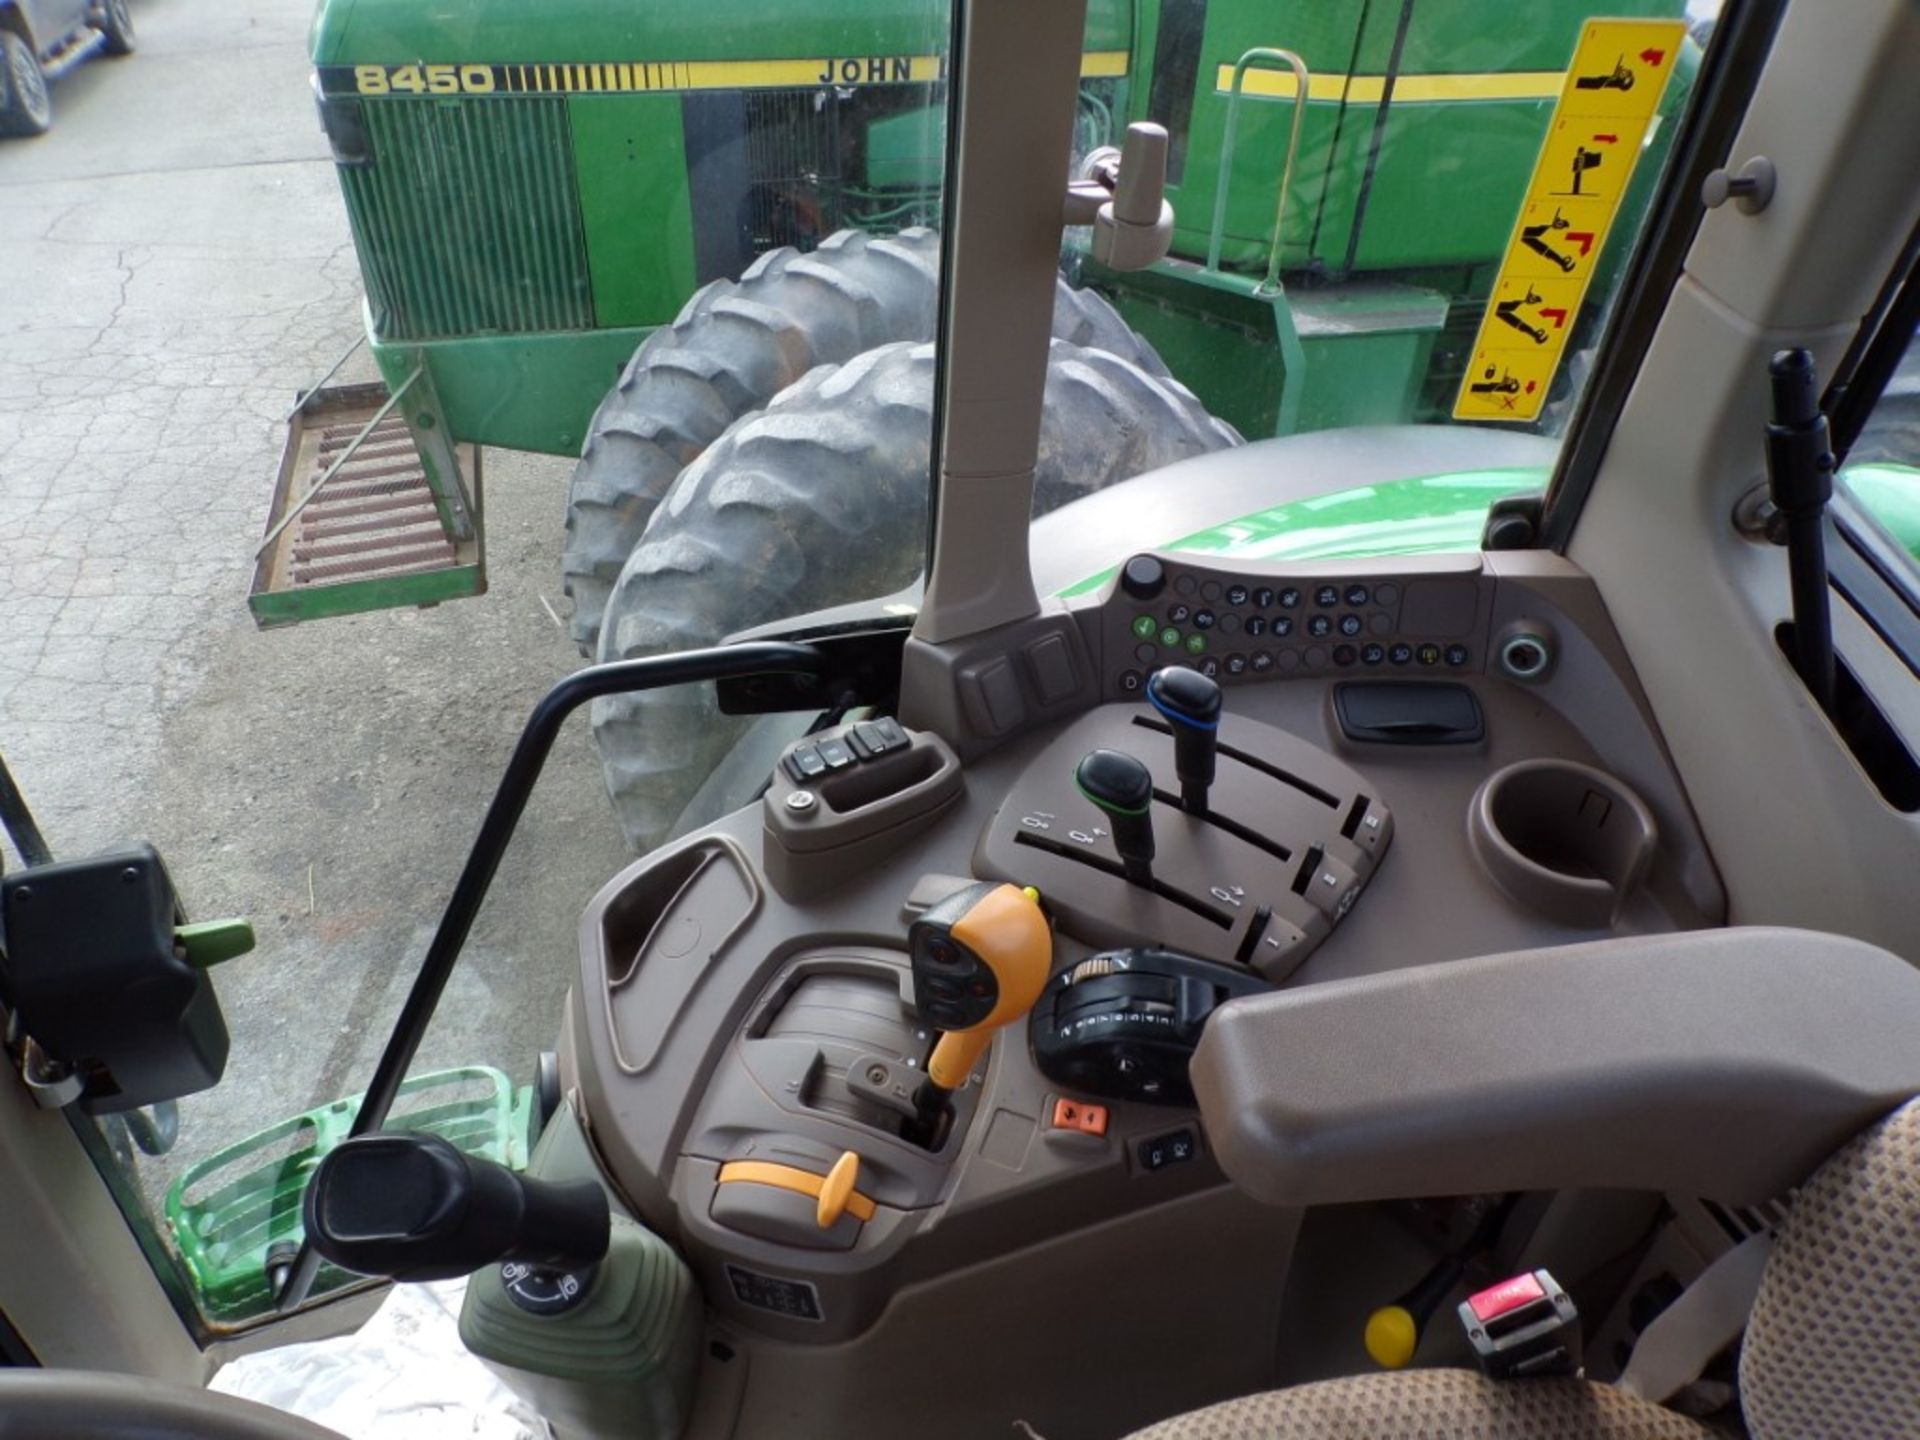 2021 John Deere 6195M, 4 WD Tractor, Power Shift Tans w/Screen, Rear Hyd. Remotes, Air Brake Hookup, - Image 7 of 8